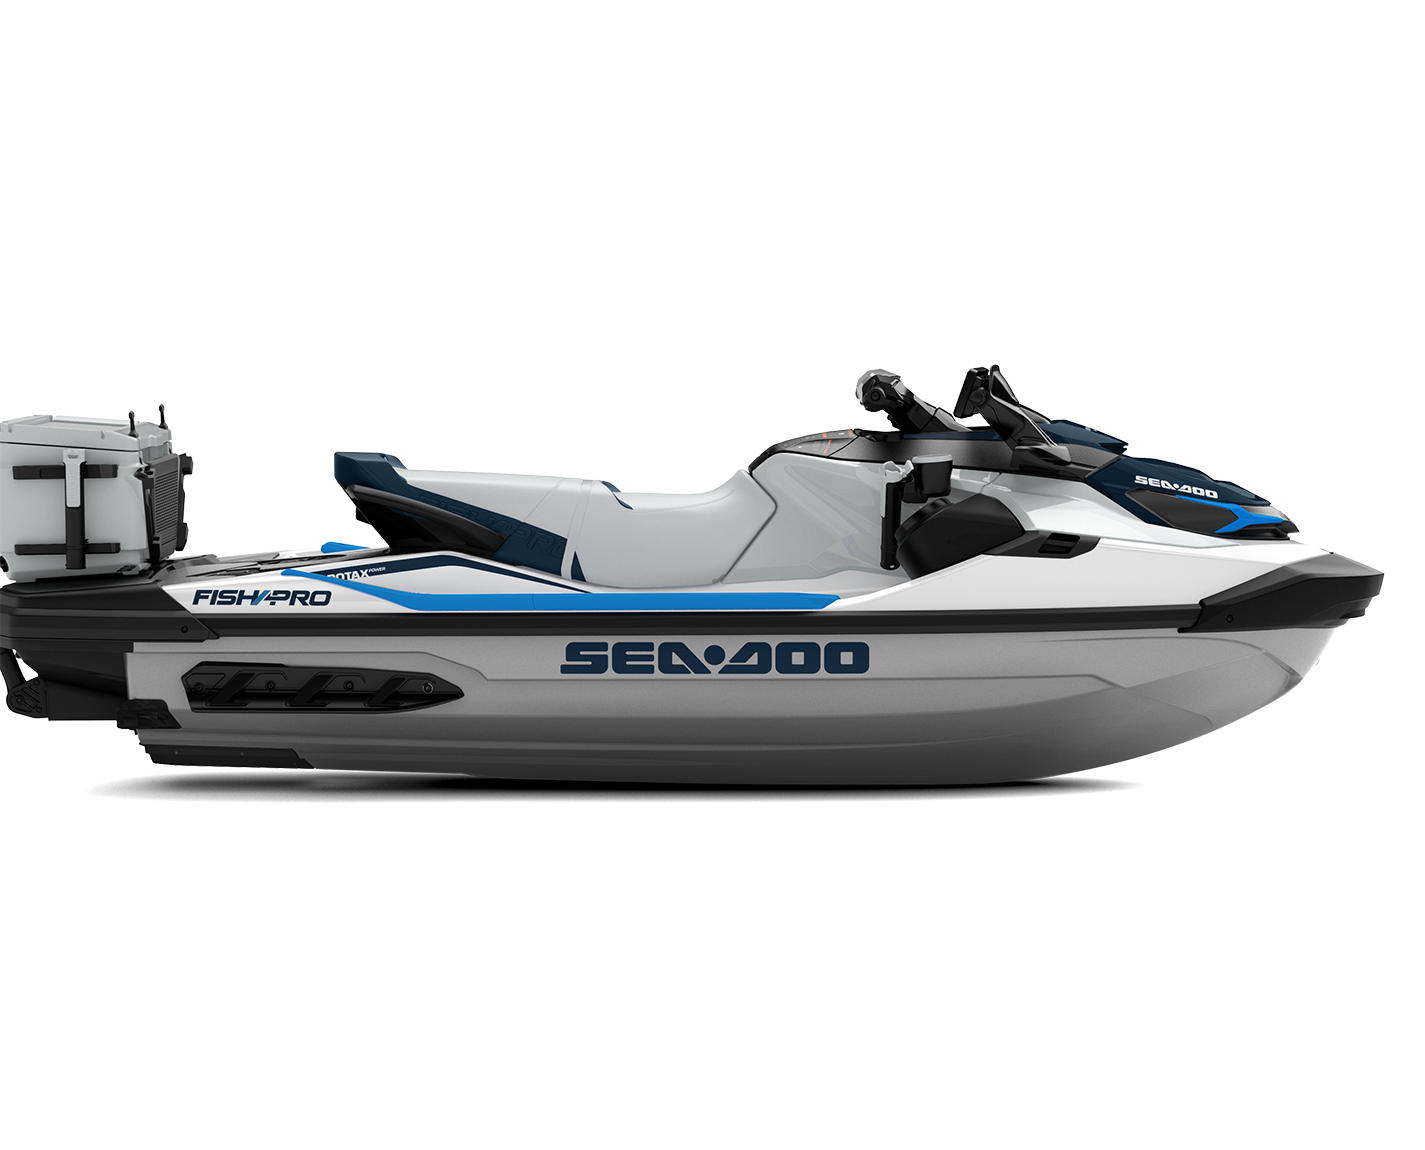 Sea-Doo FishPro Sport 170 with sound system MY23 - White / Gulfstream Blue - Side view